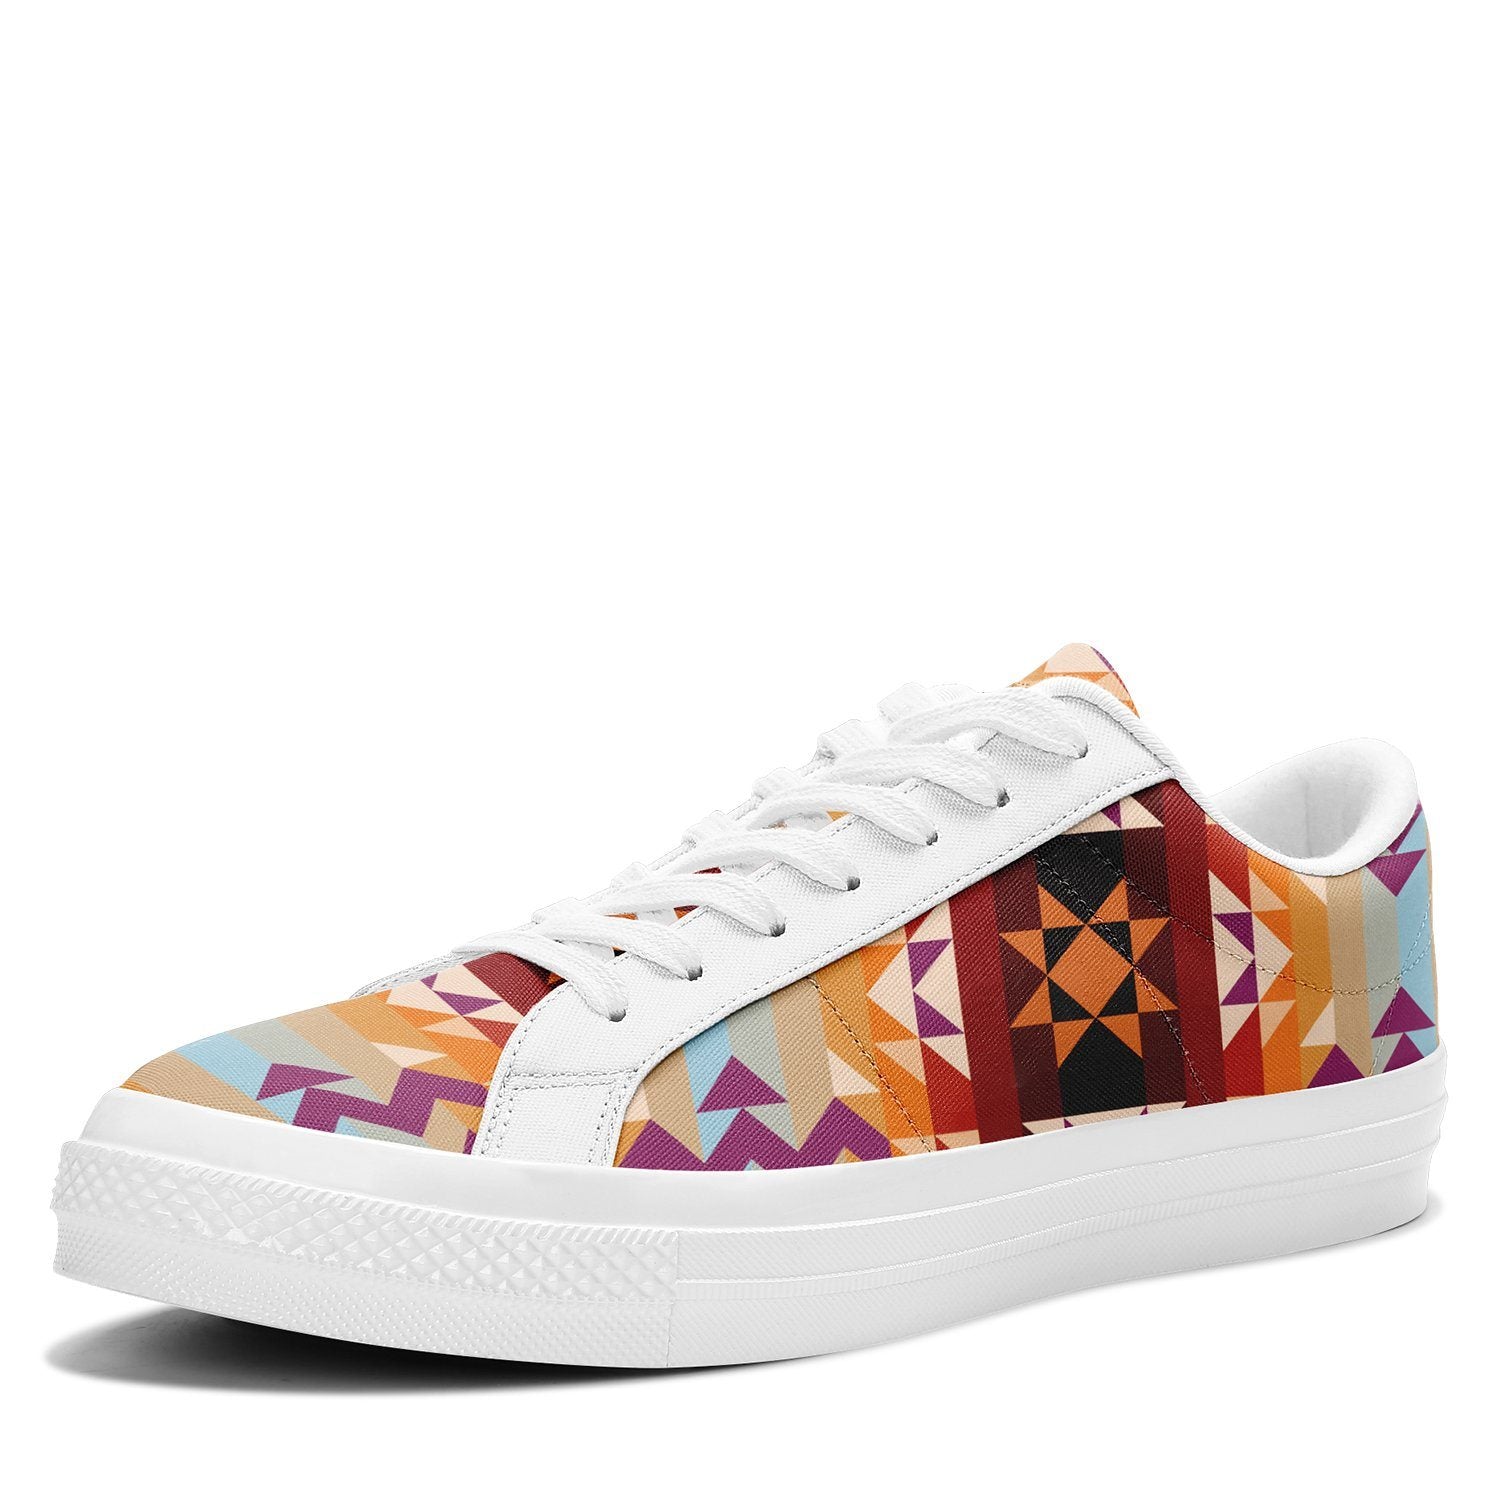 Heatwave Aapisi Low Top Canvas Shoes White Sole aapisi Herman 